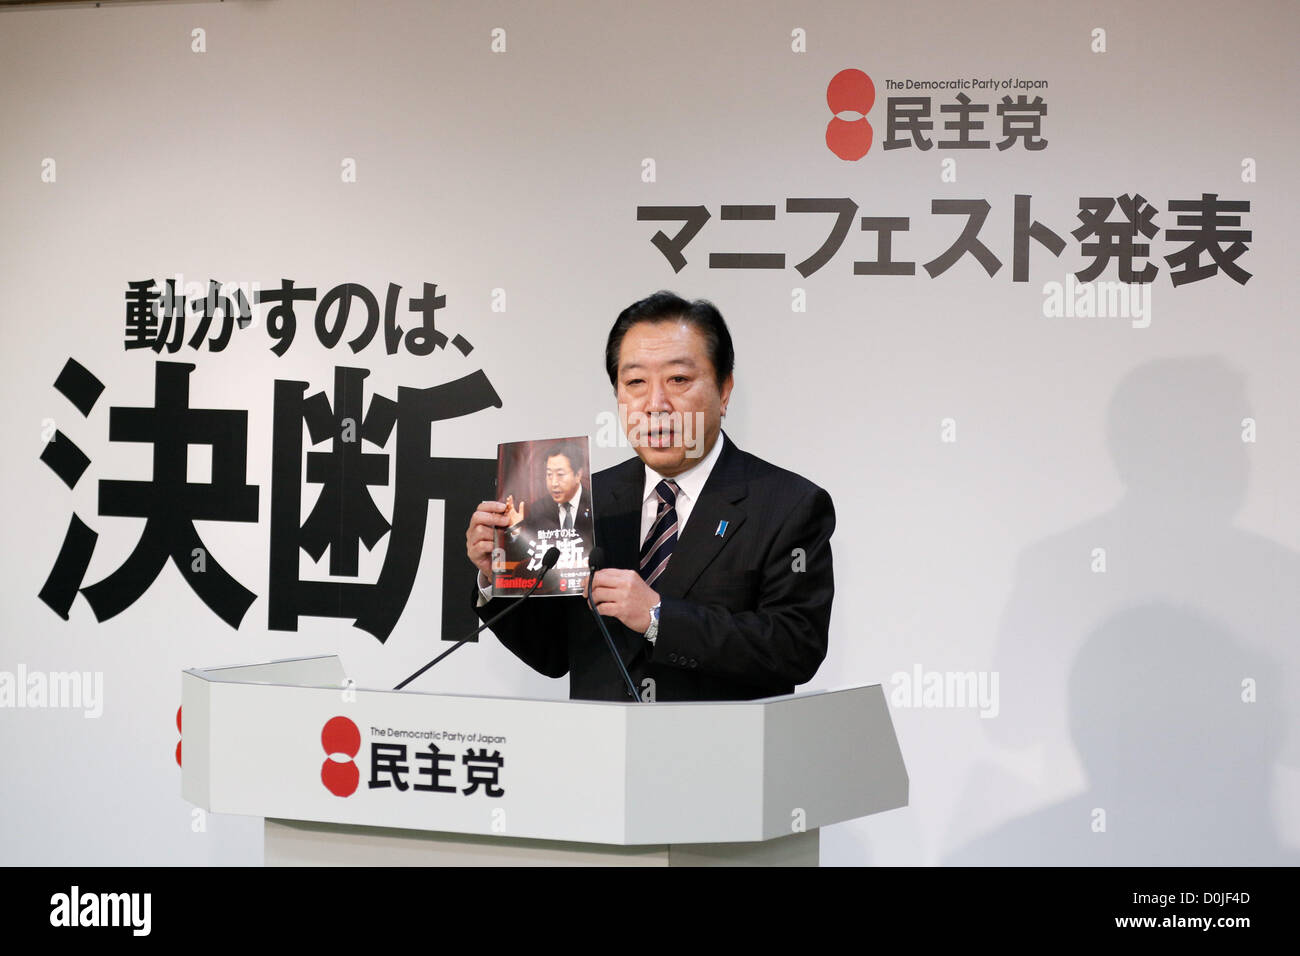 November 27, 2012, Tokyo, Japan - Japan's Prime Minister Yoshihiko Noda shows a copy of the election manifesto released by the ruling Democratic Party of Japan during a news conference at its headquarters in Tokyo on Tuesday, November 27.   The pledges for the December 16 general election stipulate Japan's participation in the Trans-Pacific Partnership free trade talks, which is opposed by some members of Noda's own ruling party. The party also promised to phase out nuclear energy in the 2030s and fight deflation by cooperating with the Bank of Japan. (Photo by AFLO) Stock Photo